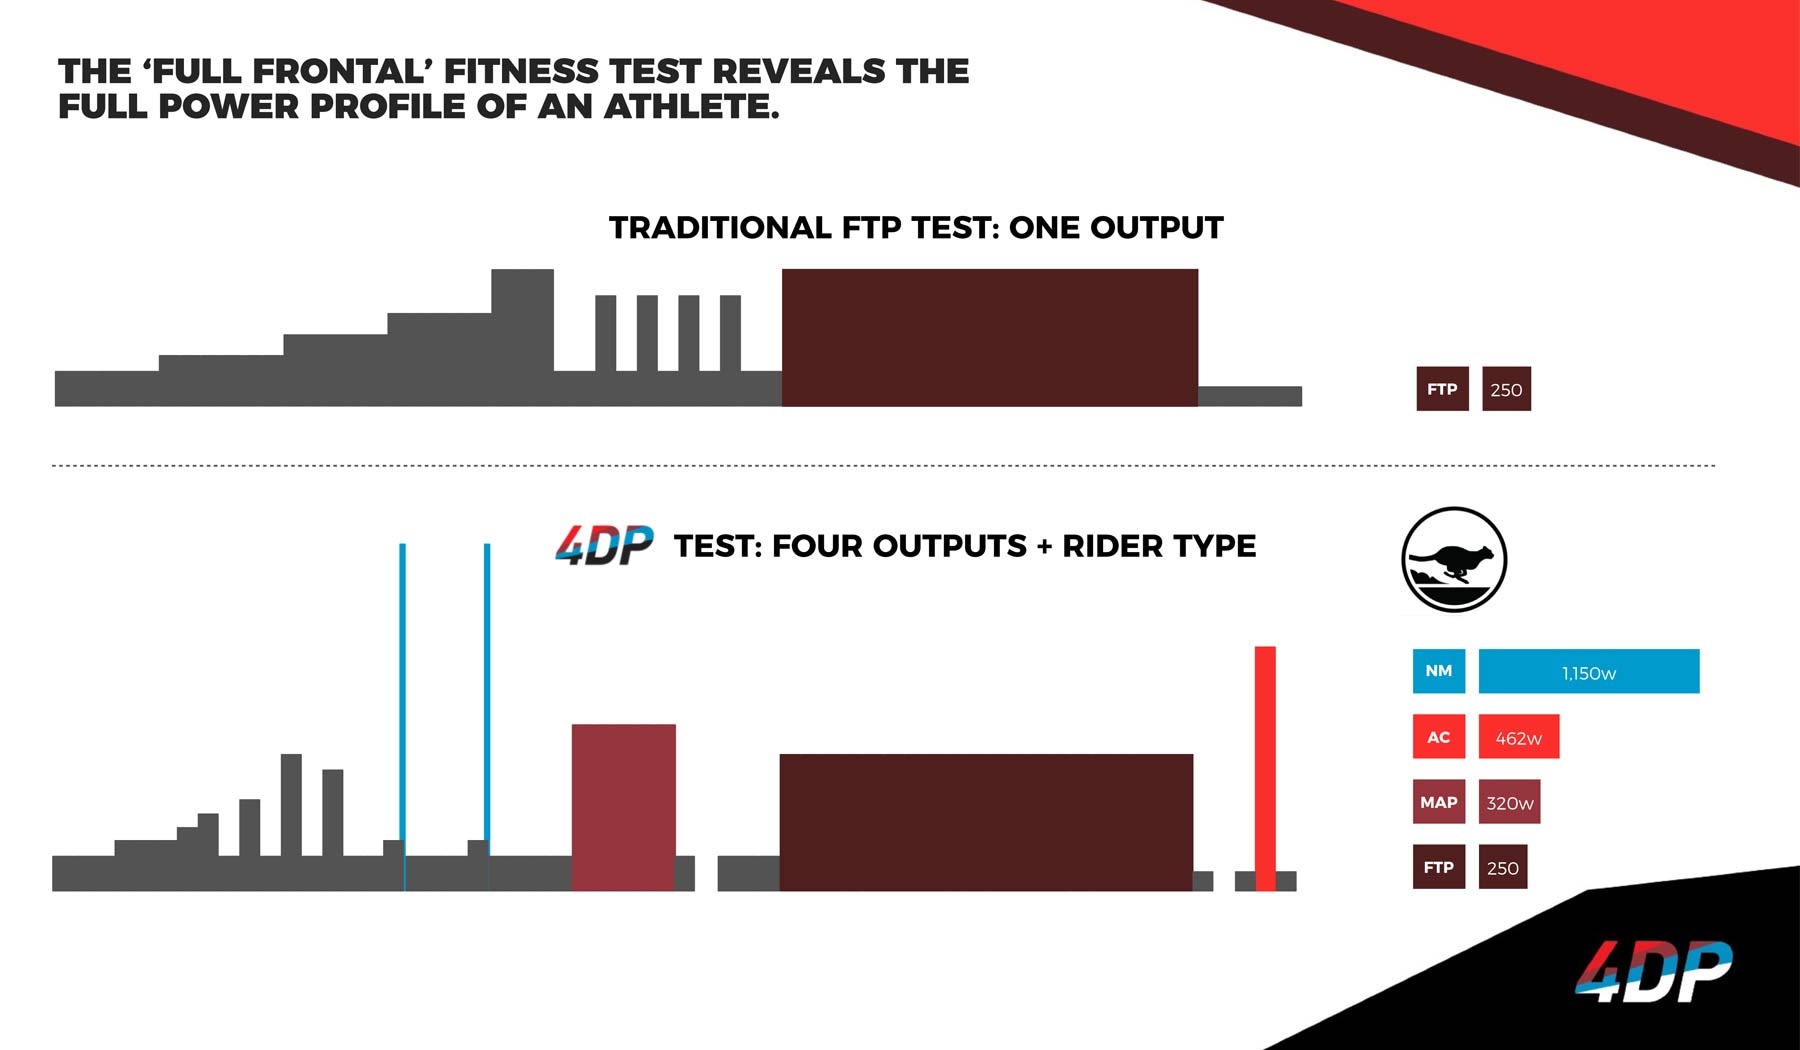 Sufferfest-4DP-Power-training_four-dimensional-power-metrics-personalized-indoor-training-FTP-NM-MAP-AC_FTP-vs-Full-Frontal-4DP.jpg